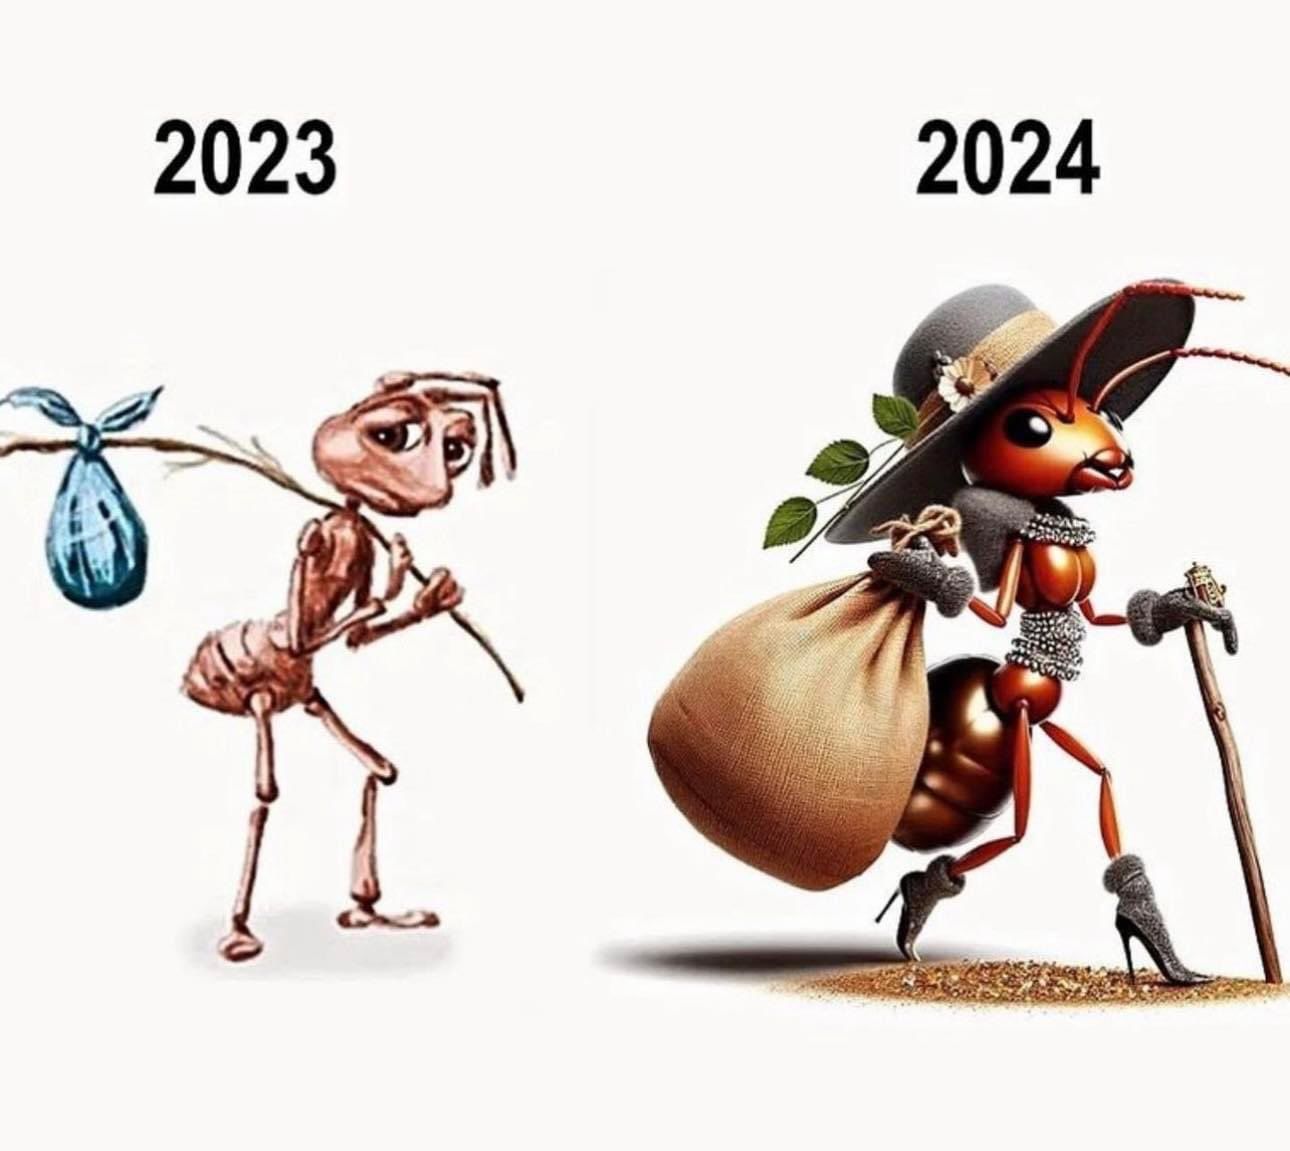 On the left side of the image is the Sad Ant With Bindle meme, labeled 2023. On the right side is 2024, depicted by a swankily dressed ant in heeled boots and a large hat, holding a large burlap sack.